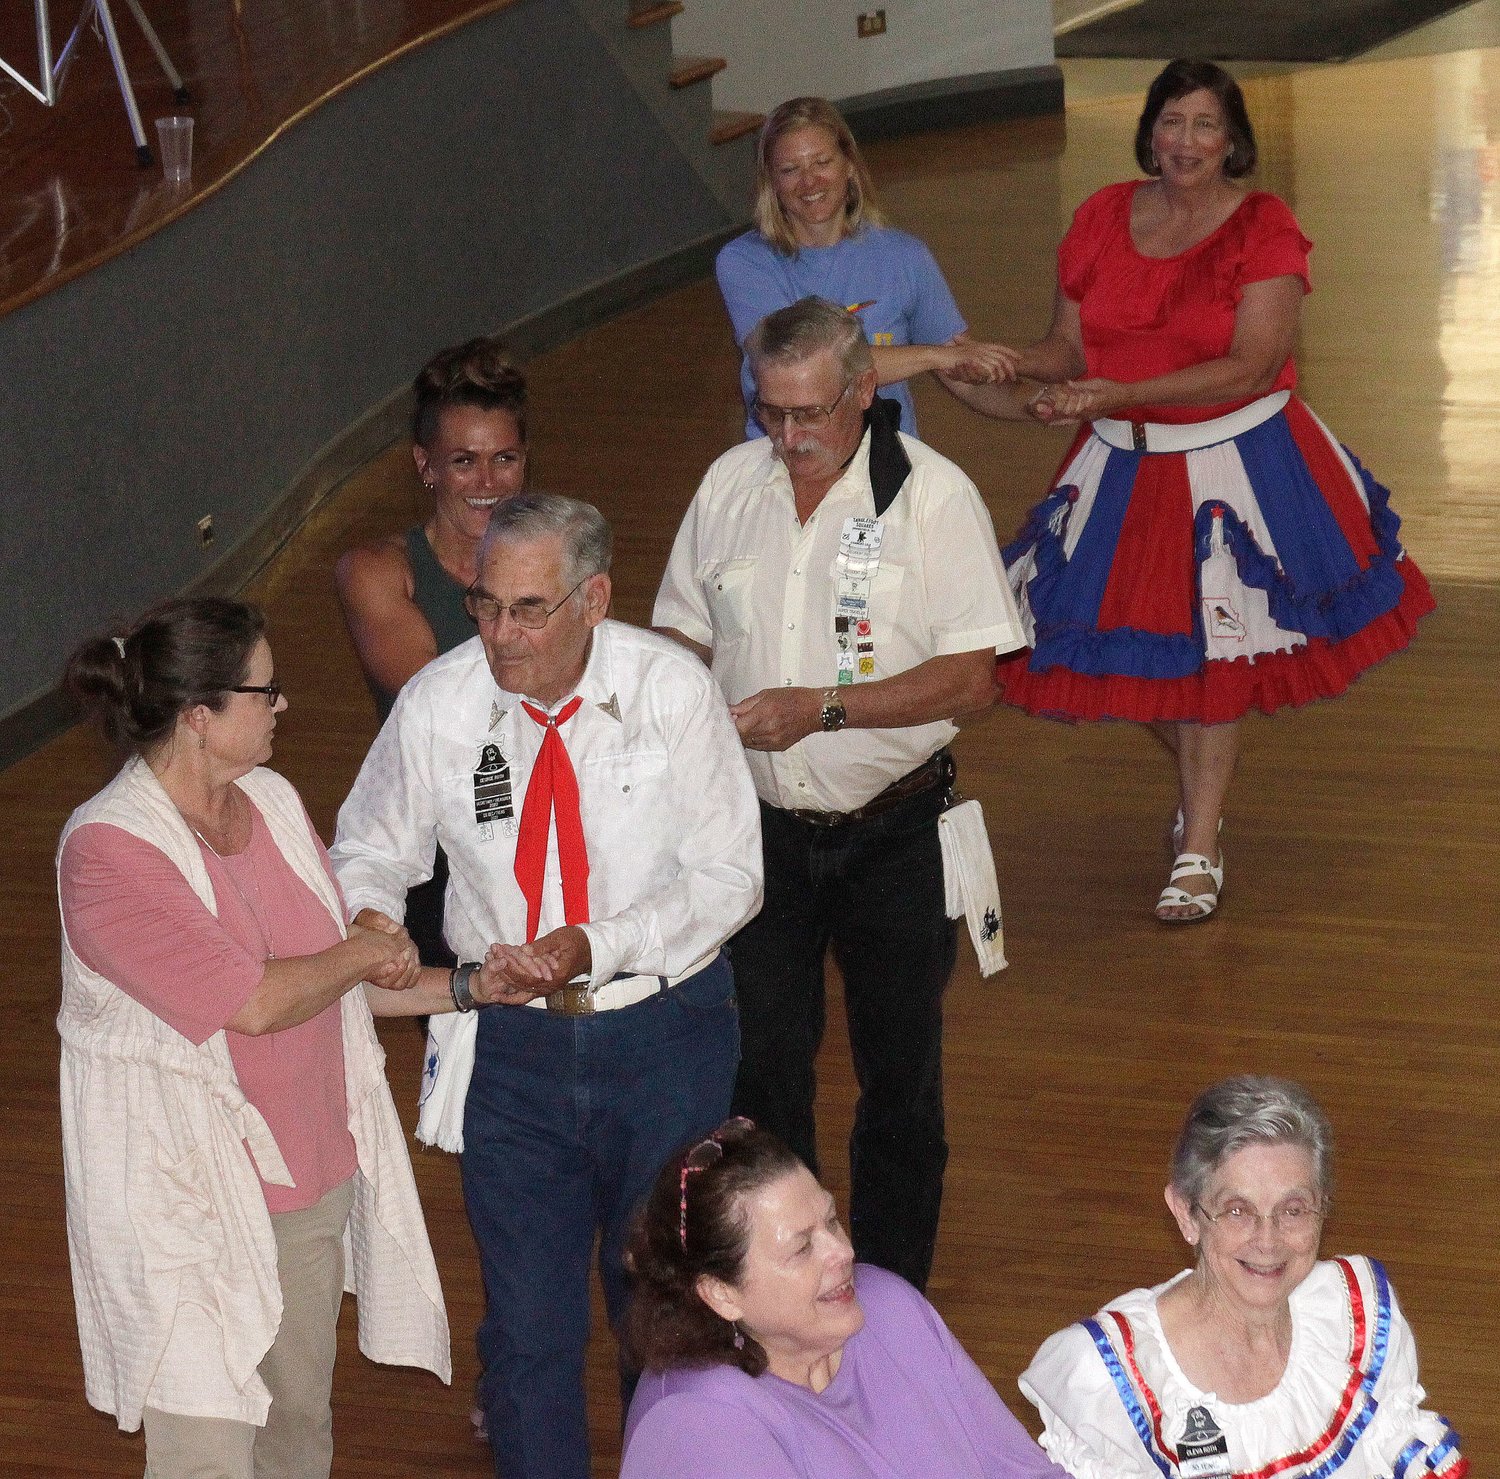 Roughly 60 persons participated in a Thursday, July 8 evening workshop to learn basic fundamentals of square dancing offered at the Moberly Municipal Auditorium. The event was free and open to the public and was co-sponsored by Little Dixie Regional Libraries and Moberly Parks and Recreation Department. Members of Little Dixie Square Dance Club were present to help teach dance moves and interact with participants.